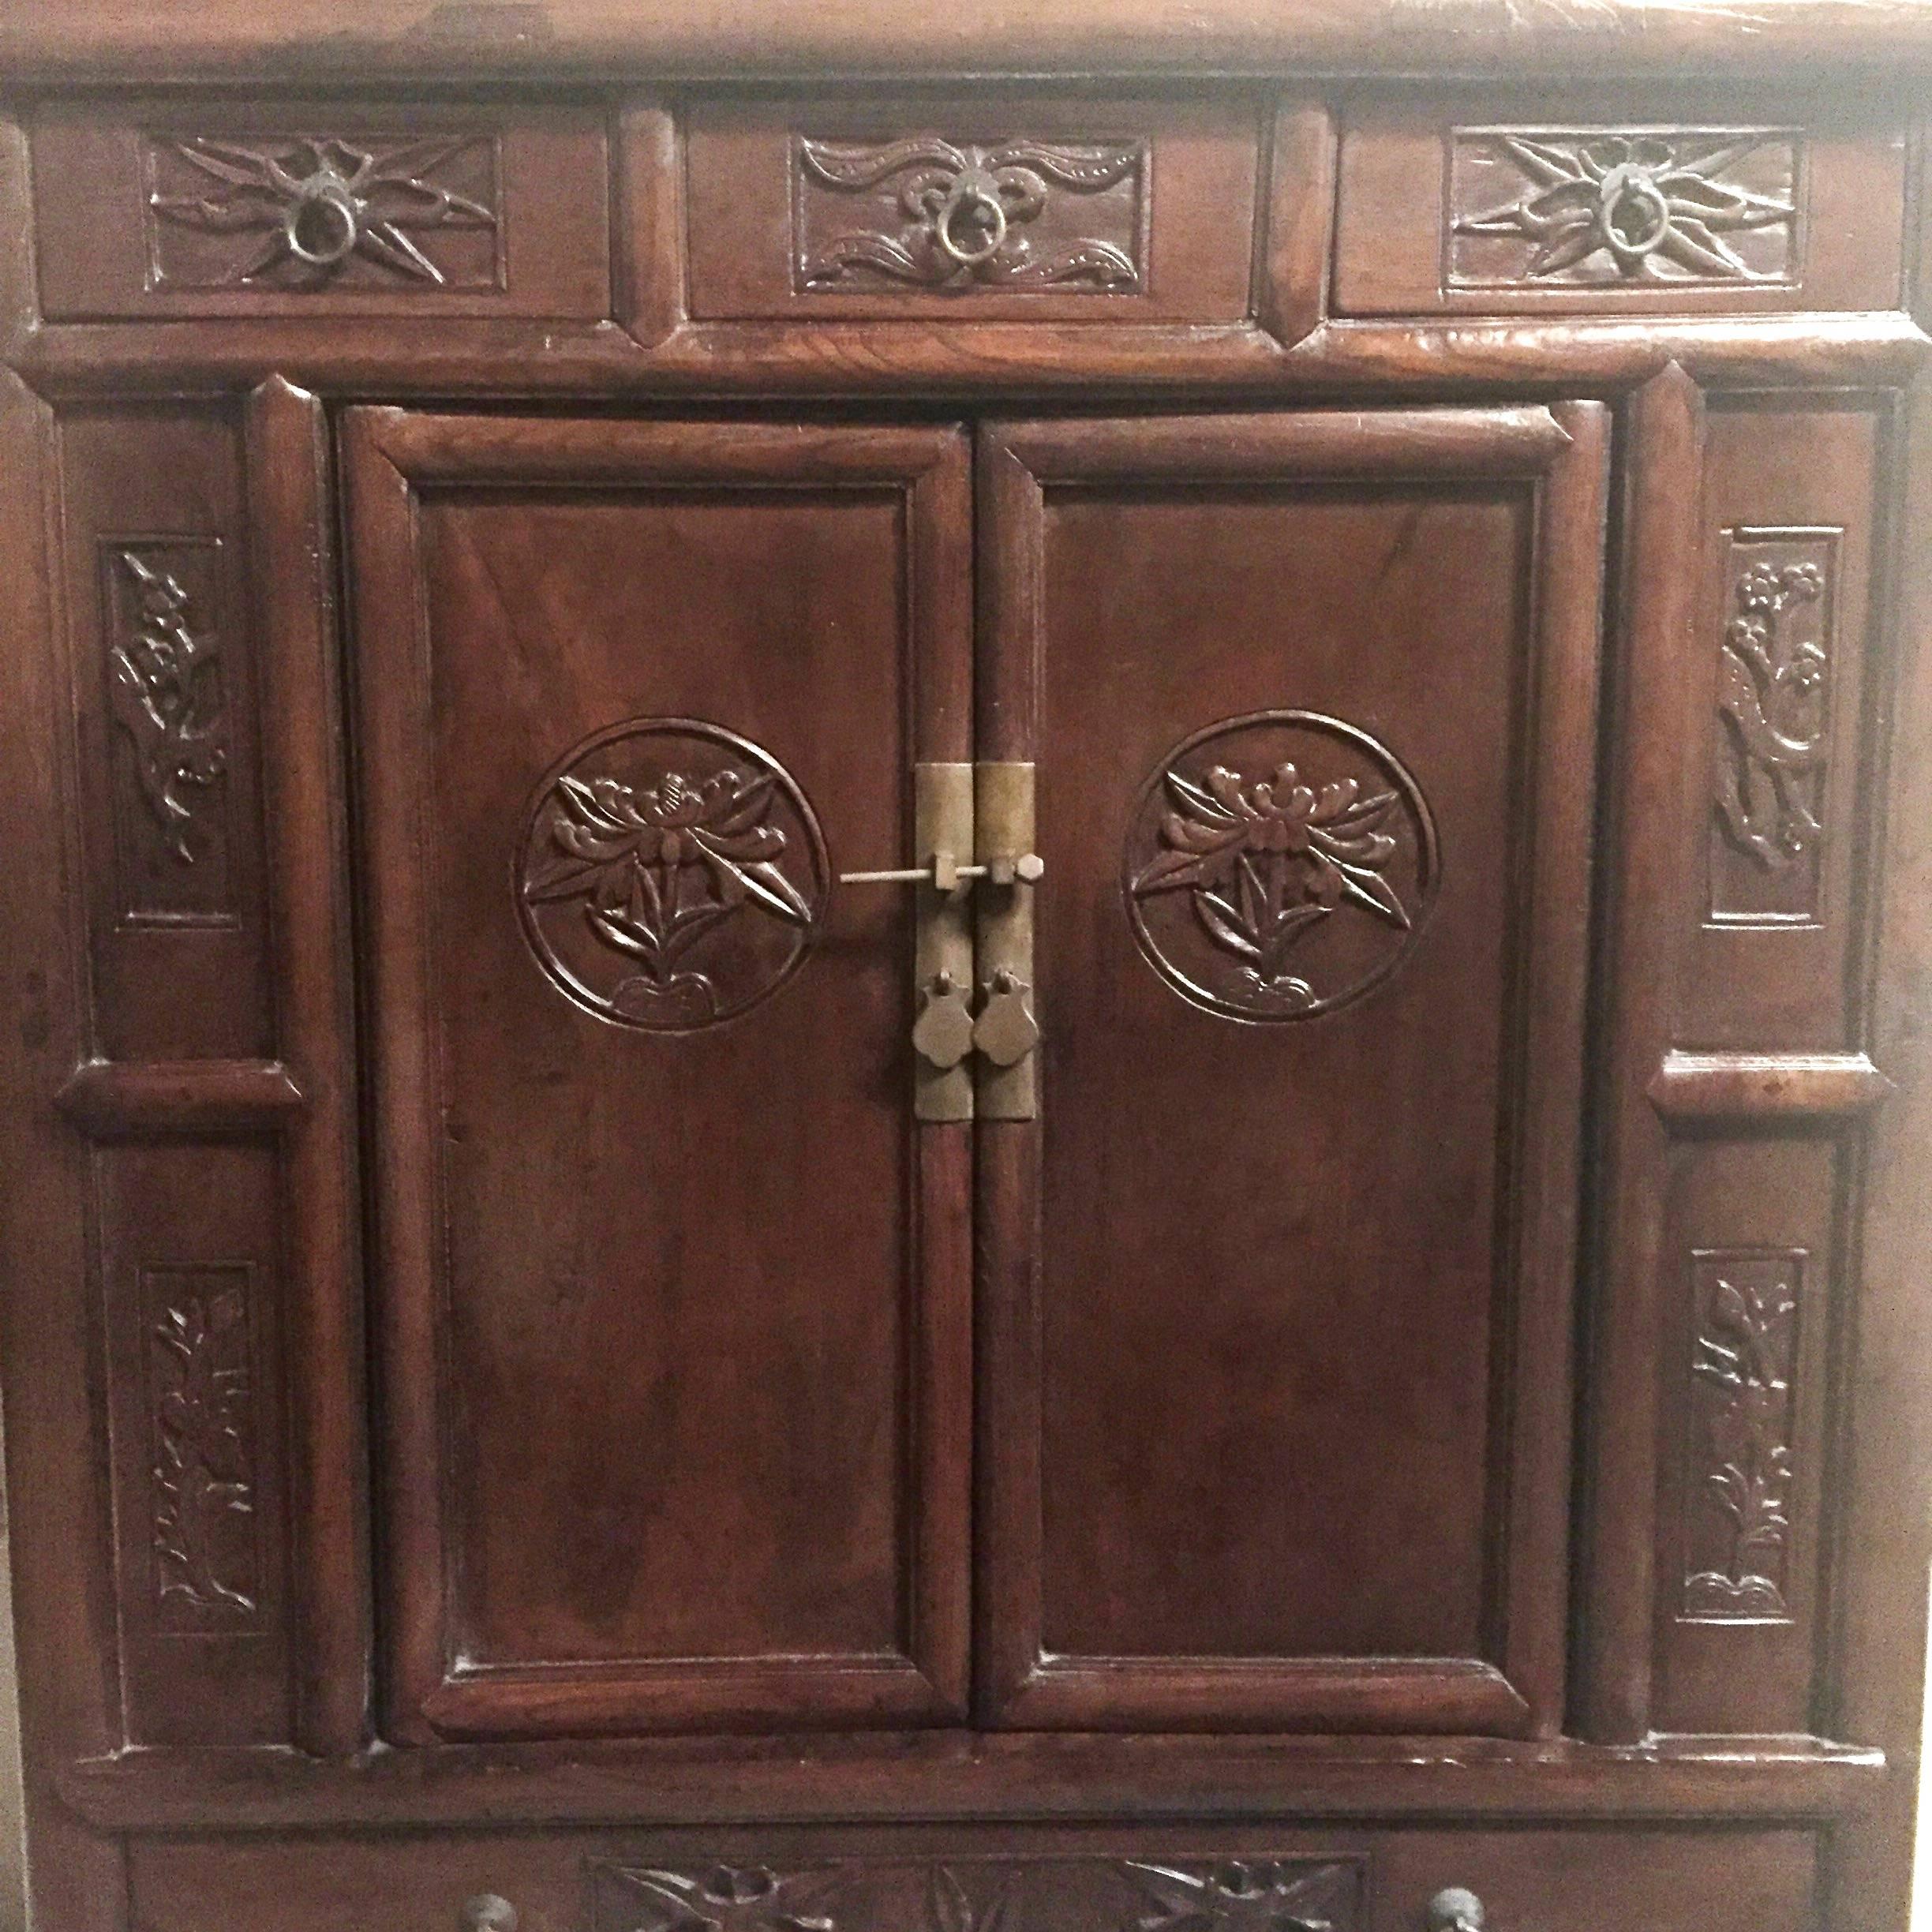 This special chest dates back to 19th century. Its use of wood, construction and overall style reflect its strong northern Chinese influence. The featured flower, peony, can be found on the doors. They symbolize prosperity. The side panels are